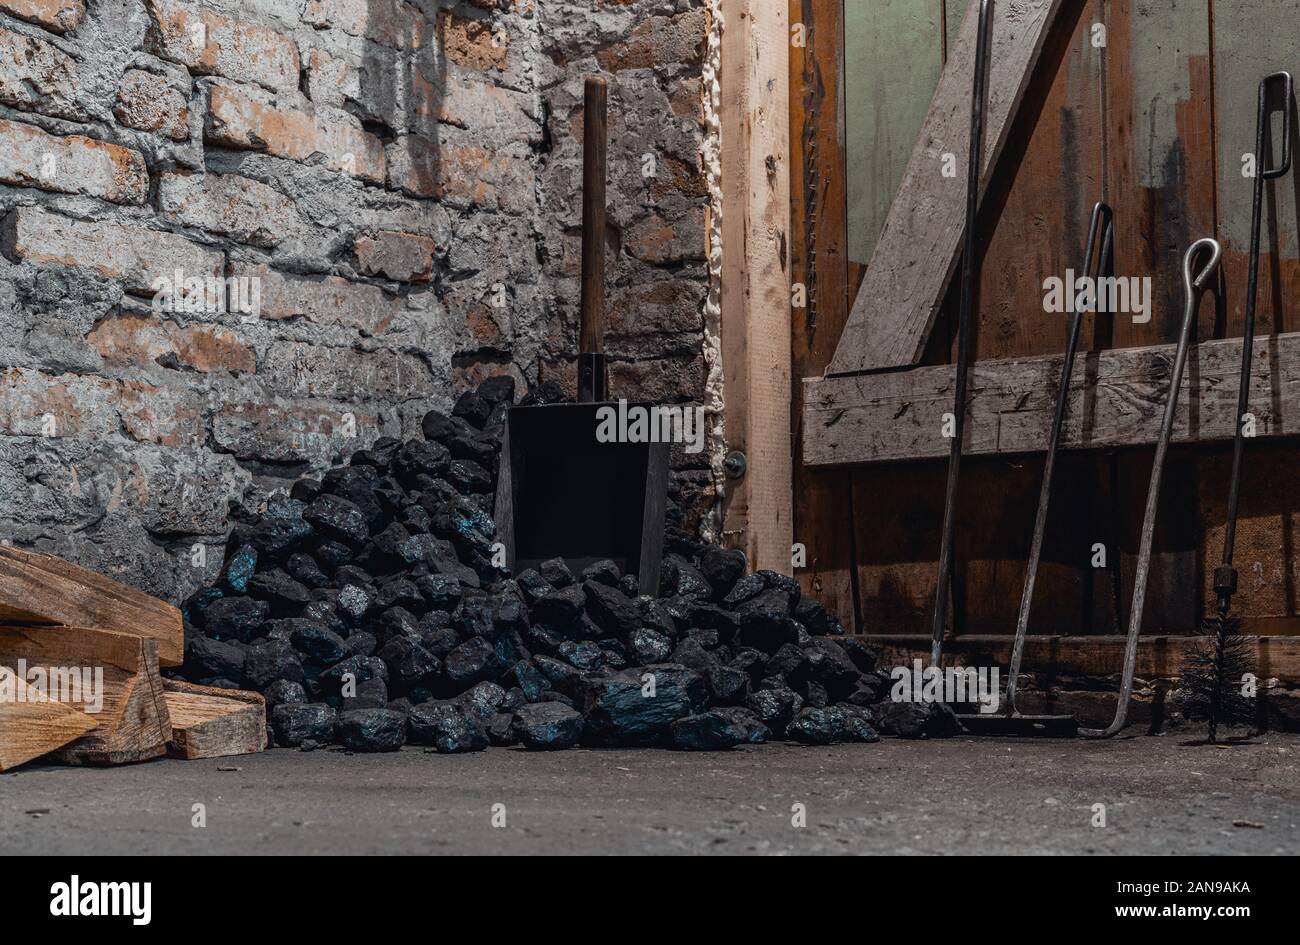 Coal, wood and shovel on the floor at the basement prepared for heating the house with. Stock Photo